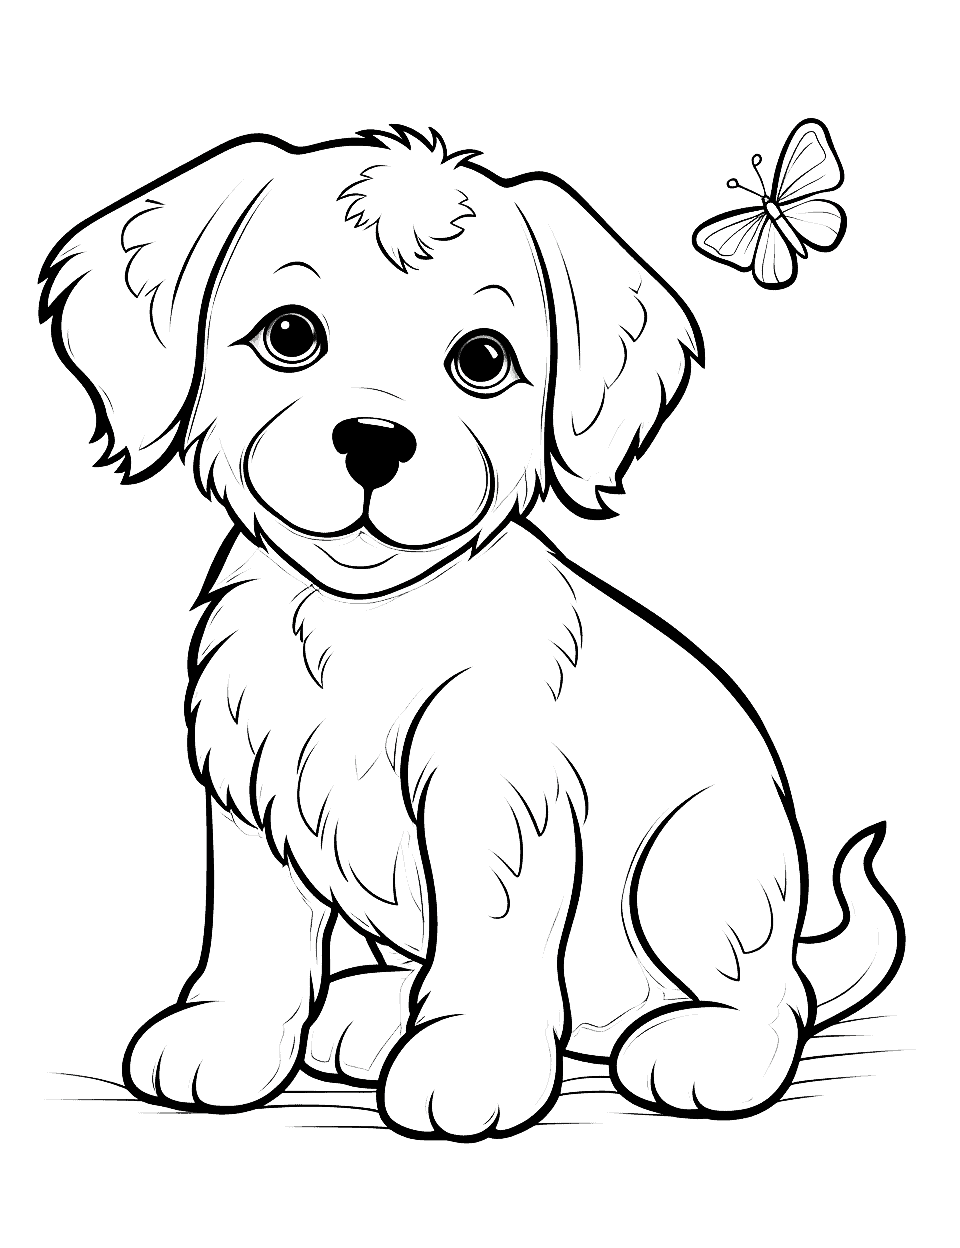 Sweet and Fluffy Goldendoodle Puppy Coloring Page - A Goldendoodle puppy with fluffy fur and a cute butterfly flying by.